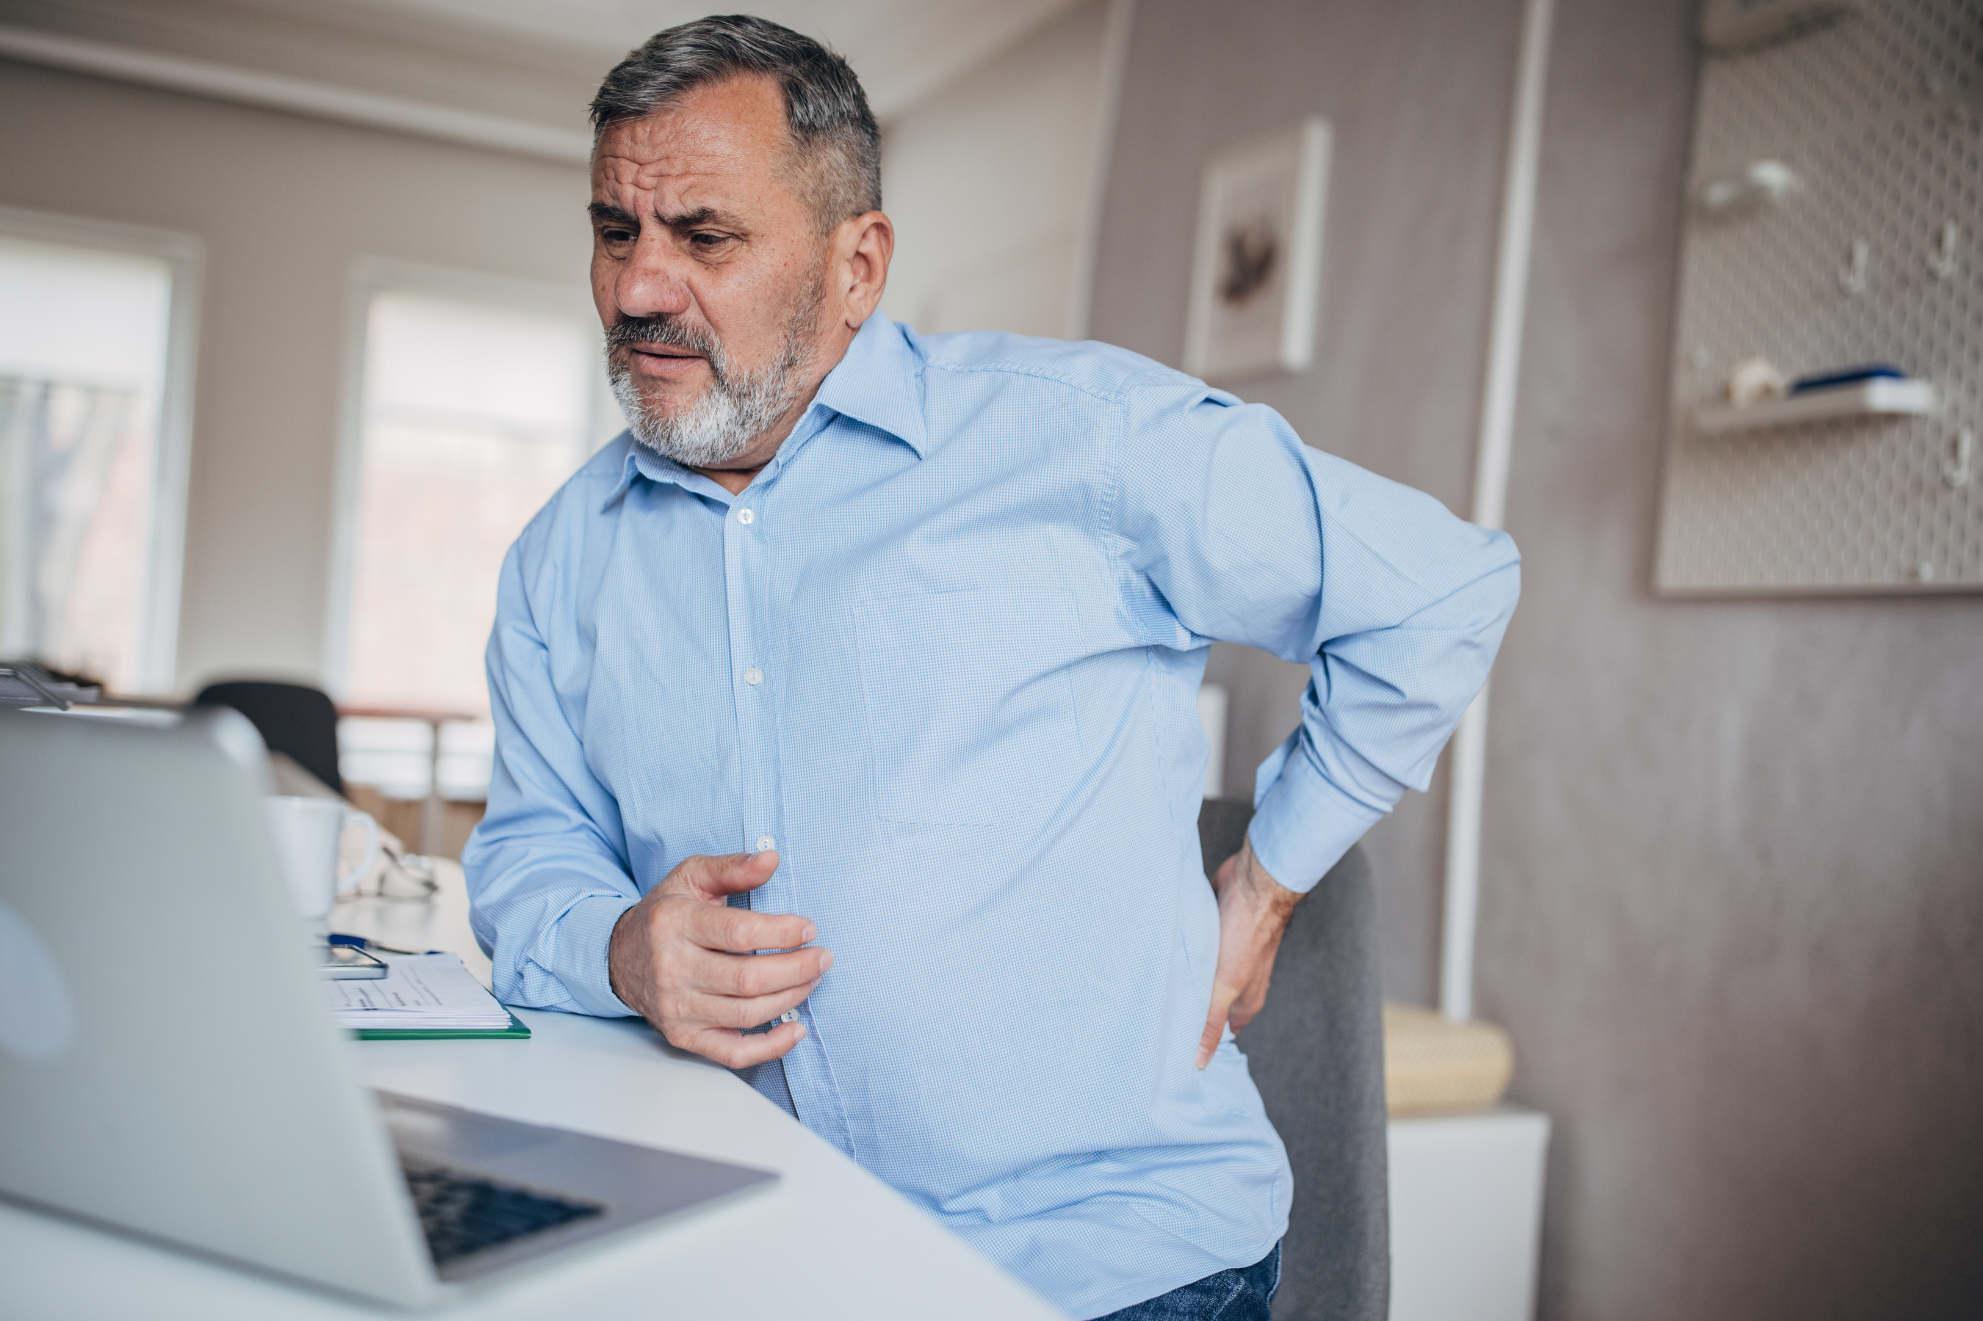 Man With Chronic Back Pain When Sitting At His Desk